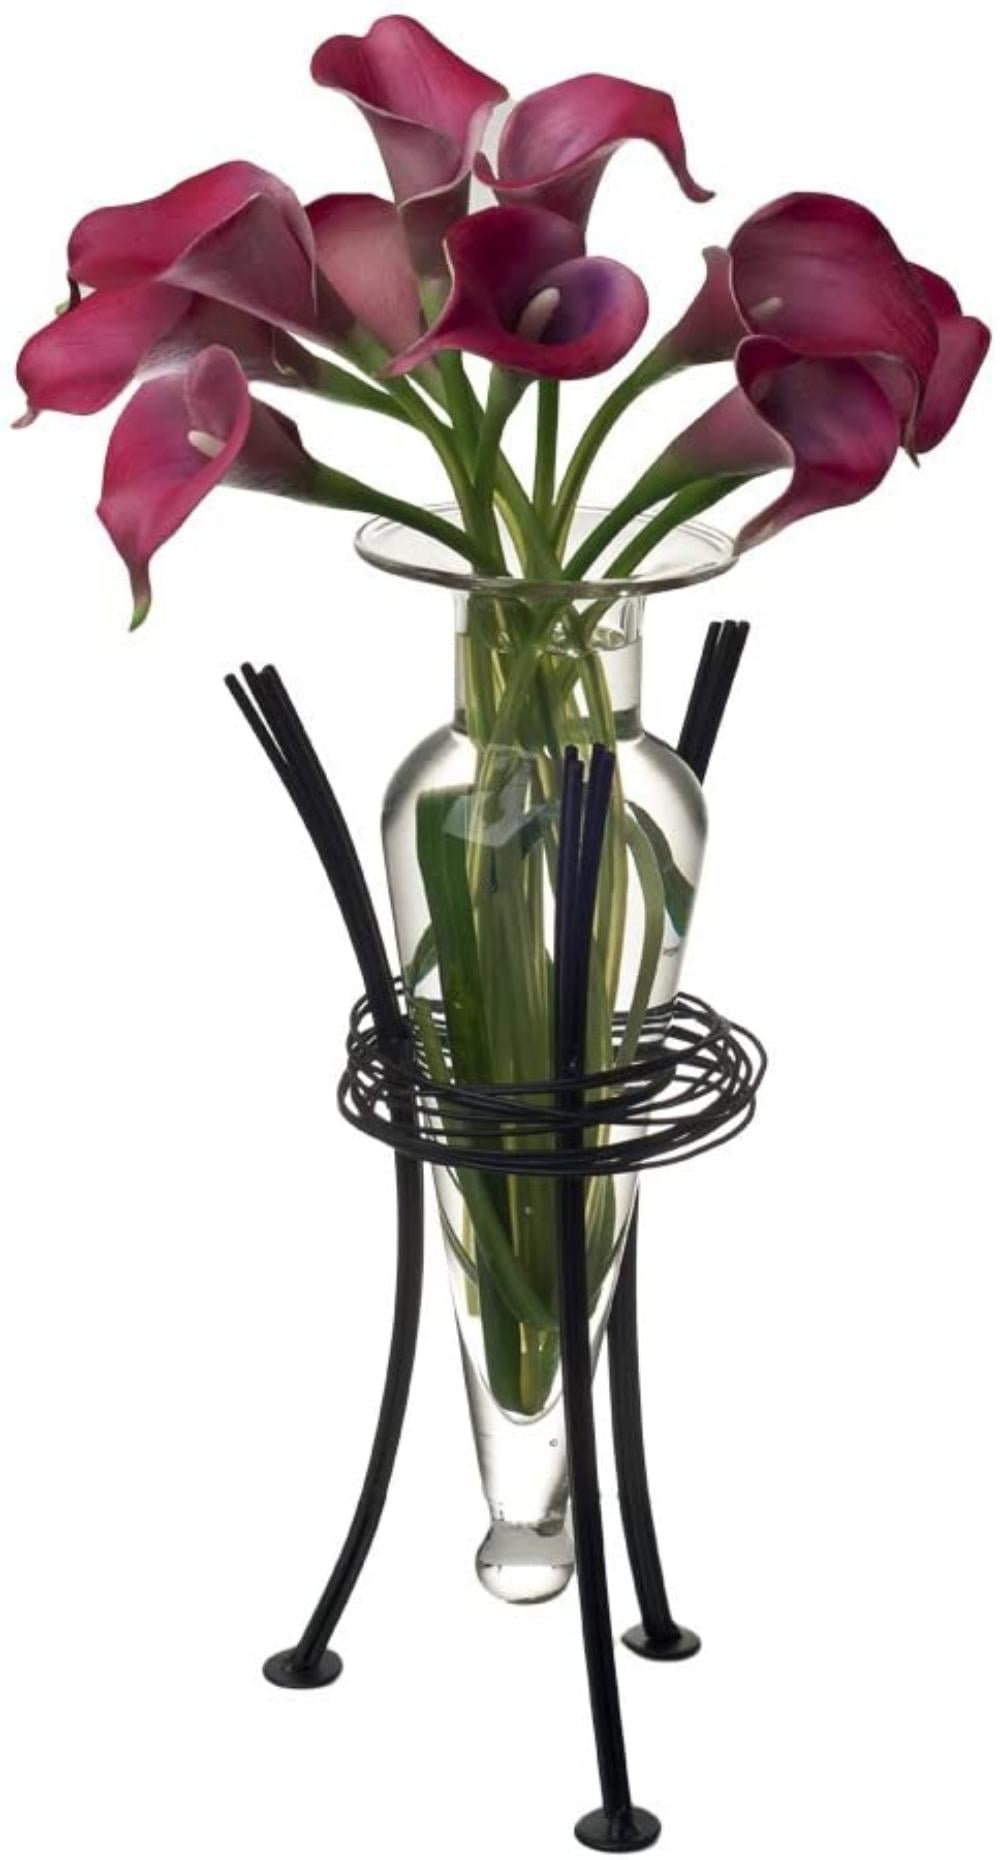 Set of 2 Glass Cylinder Vases on Rustic Iron Stand QB102-2 